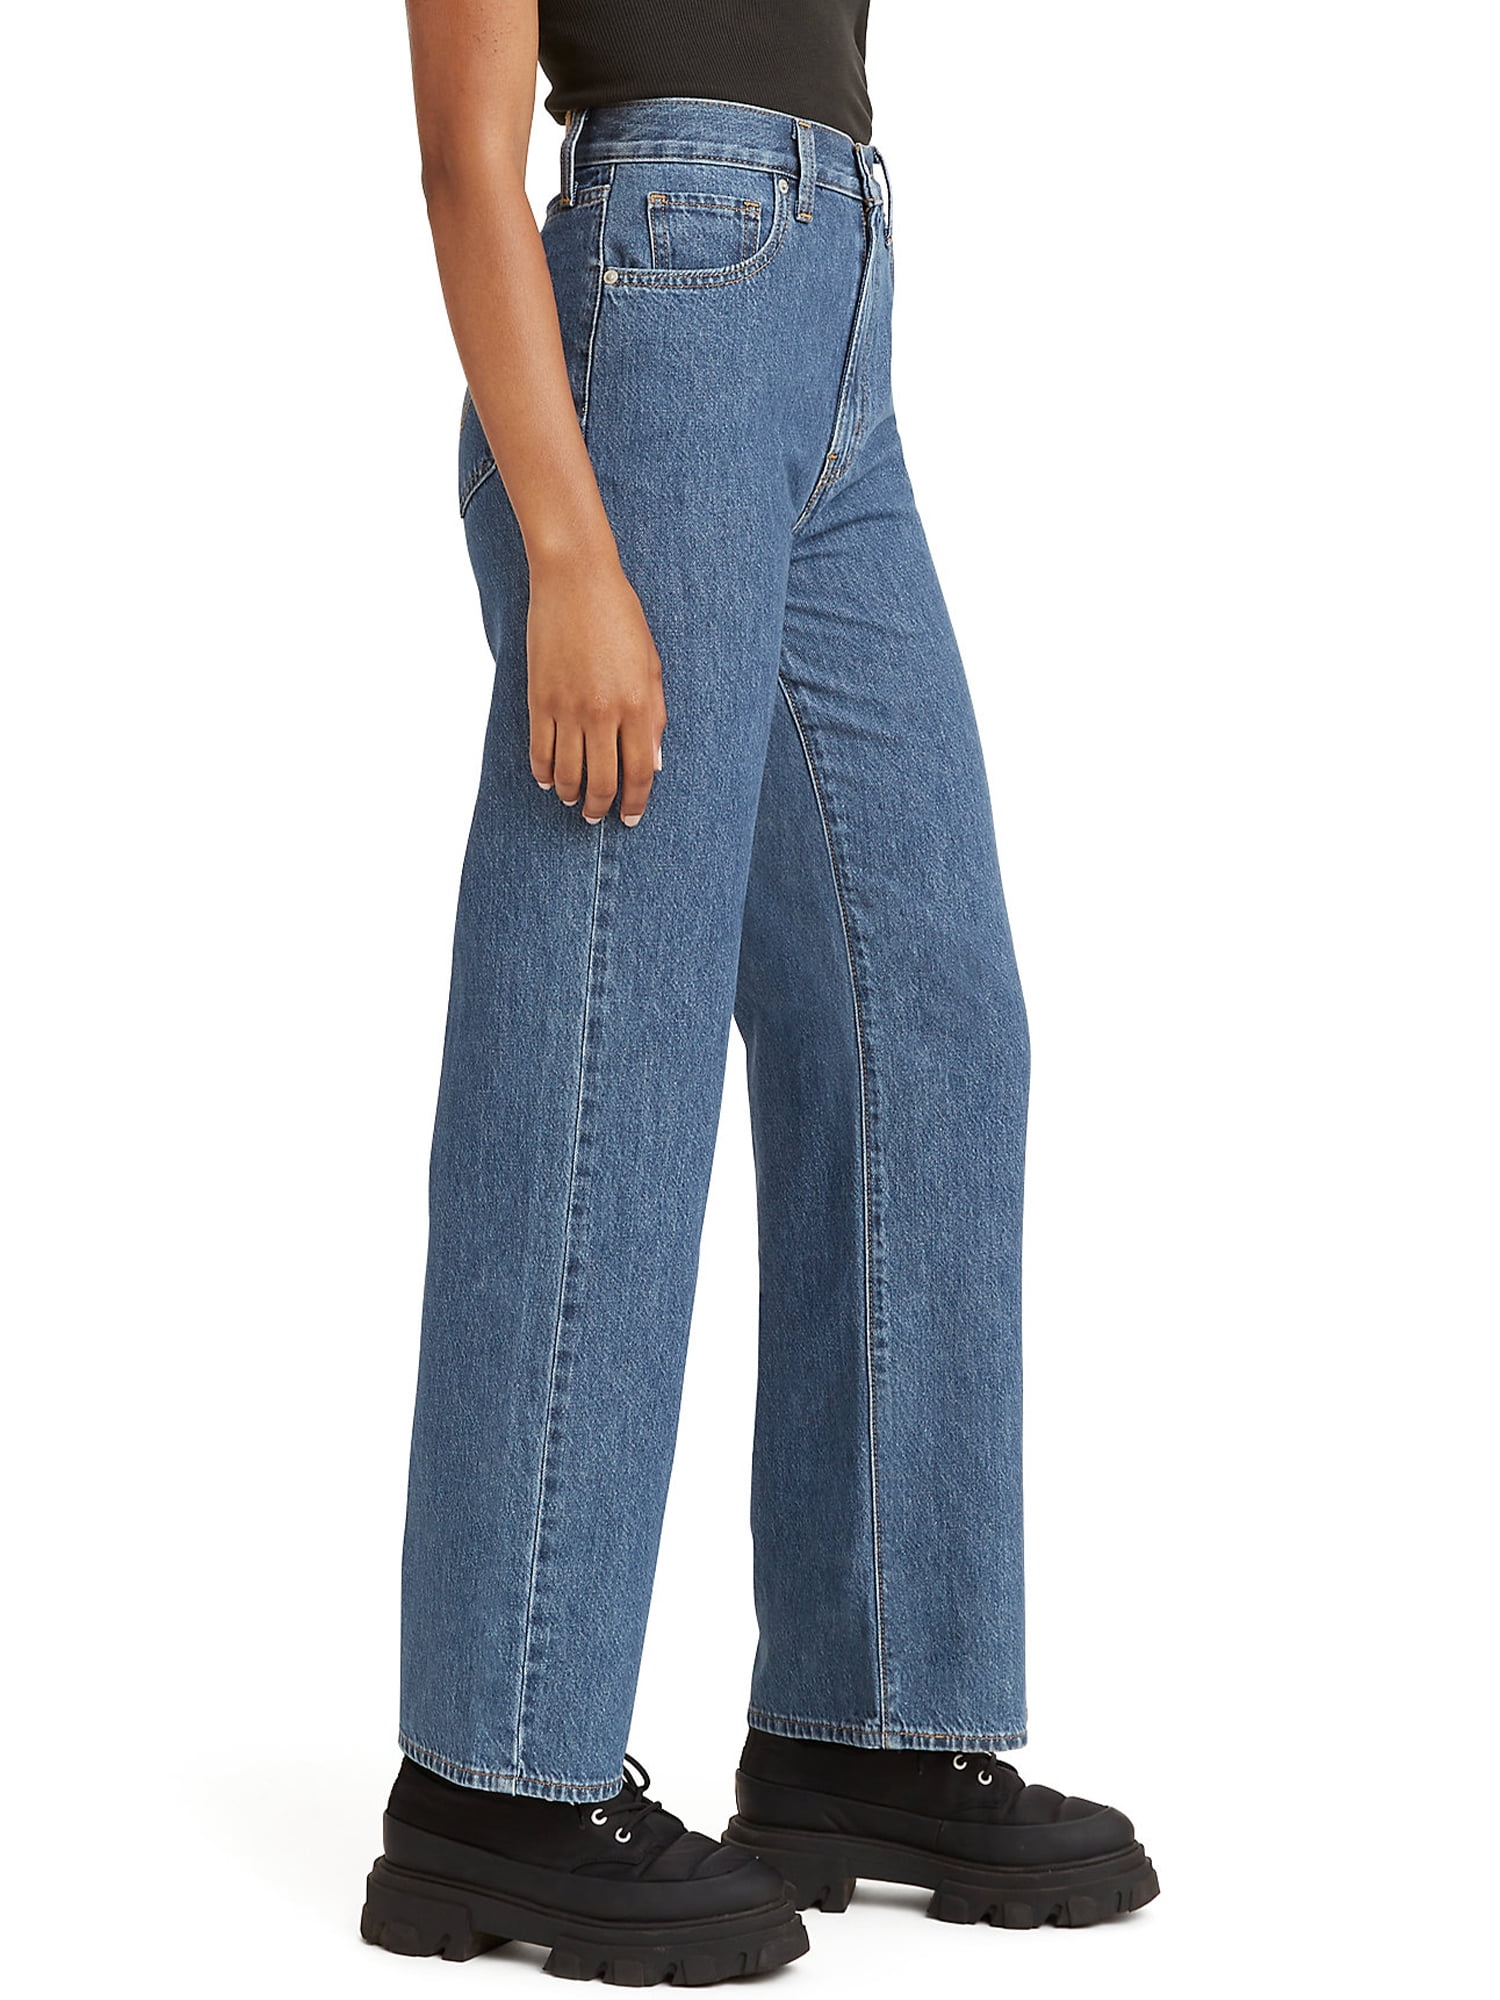 Levi's Women's High-Rise Straight Jeans 